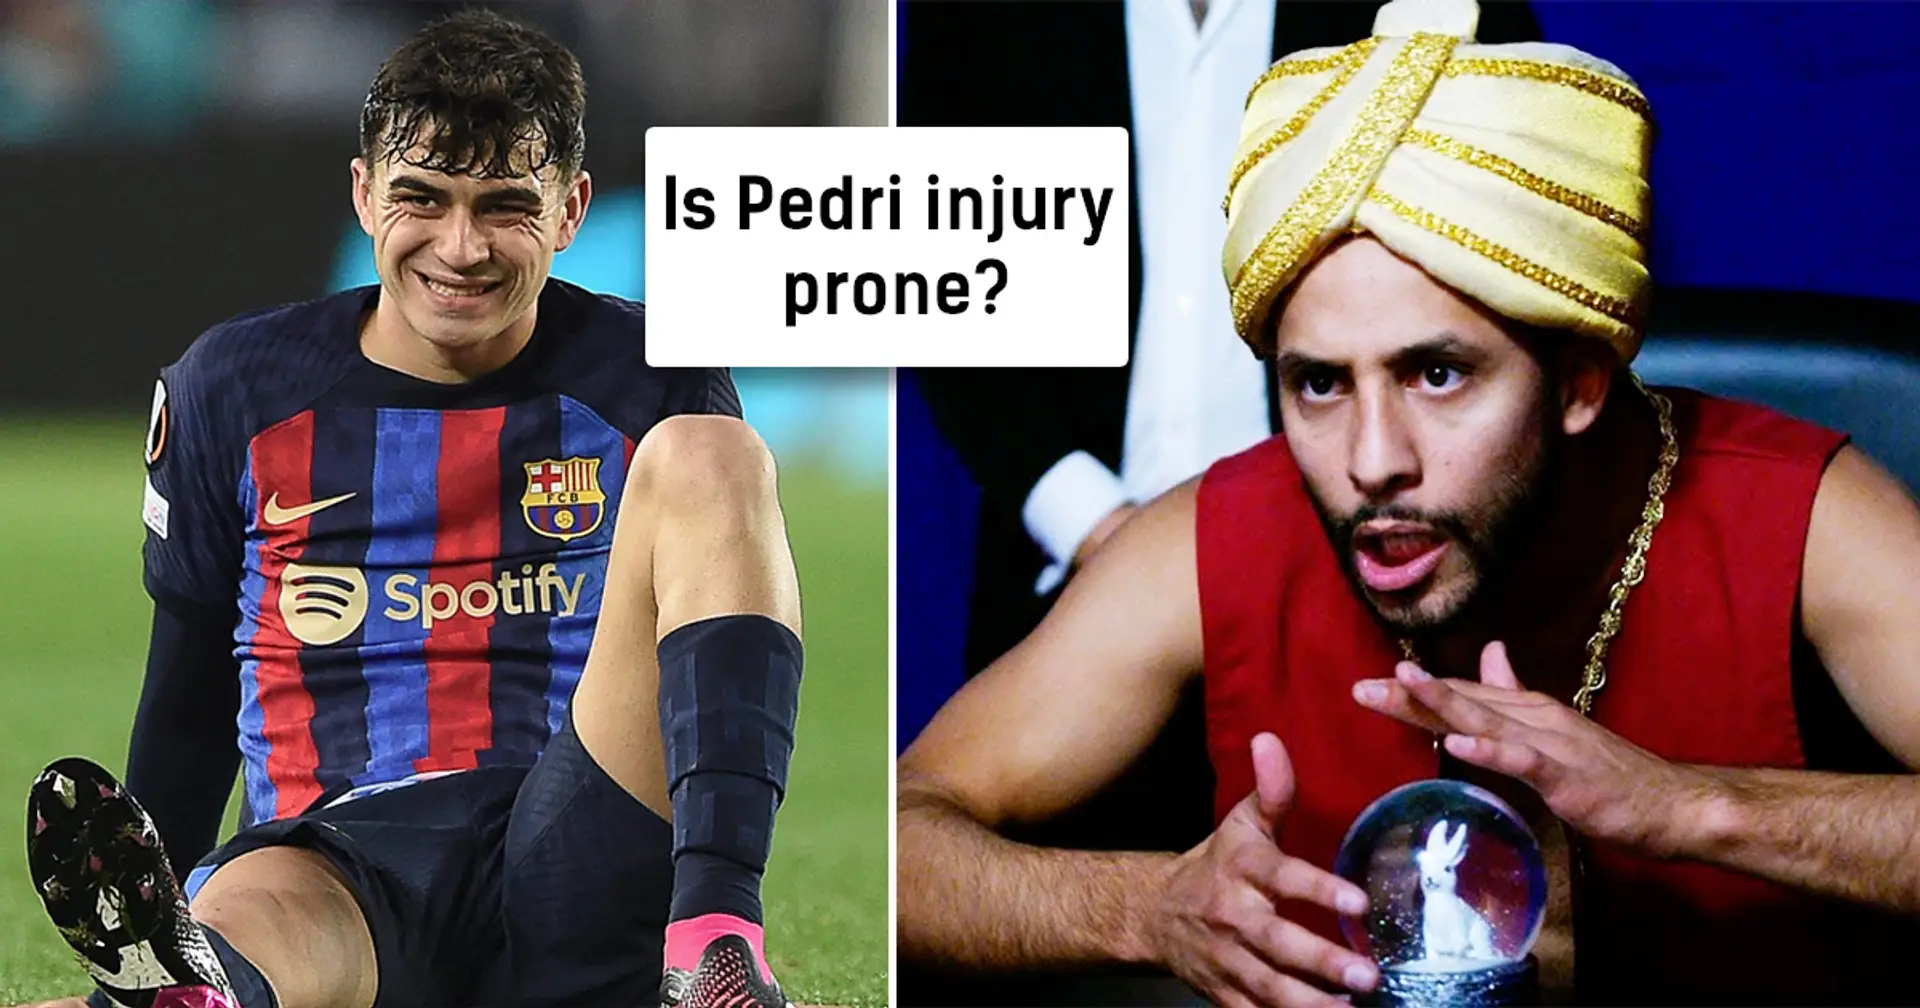 'My brain implant allows me to predict future’: Barca fan says exact date when Pedri’s injuries over